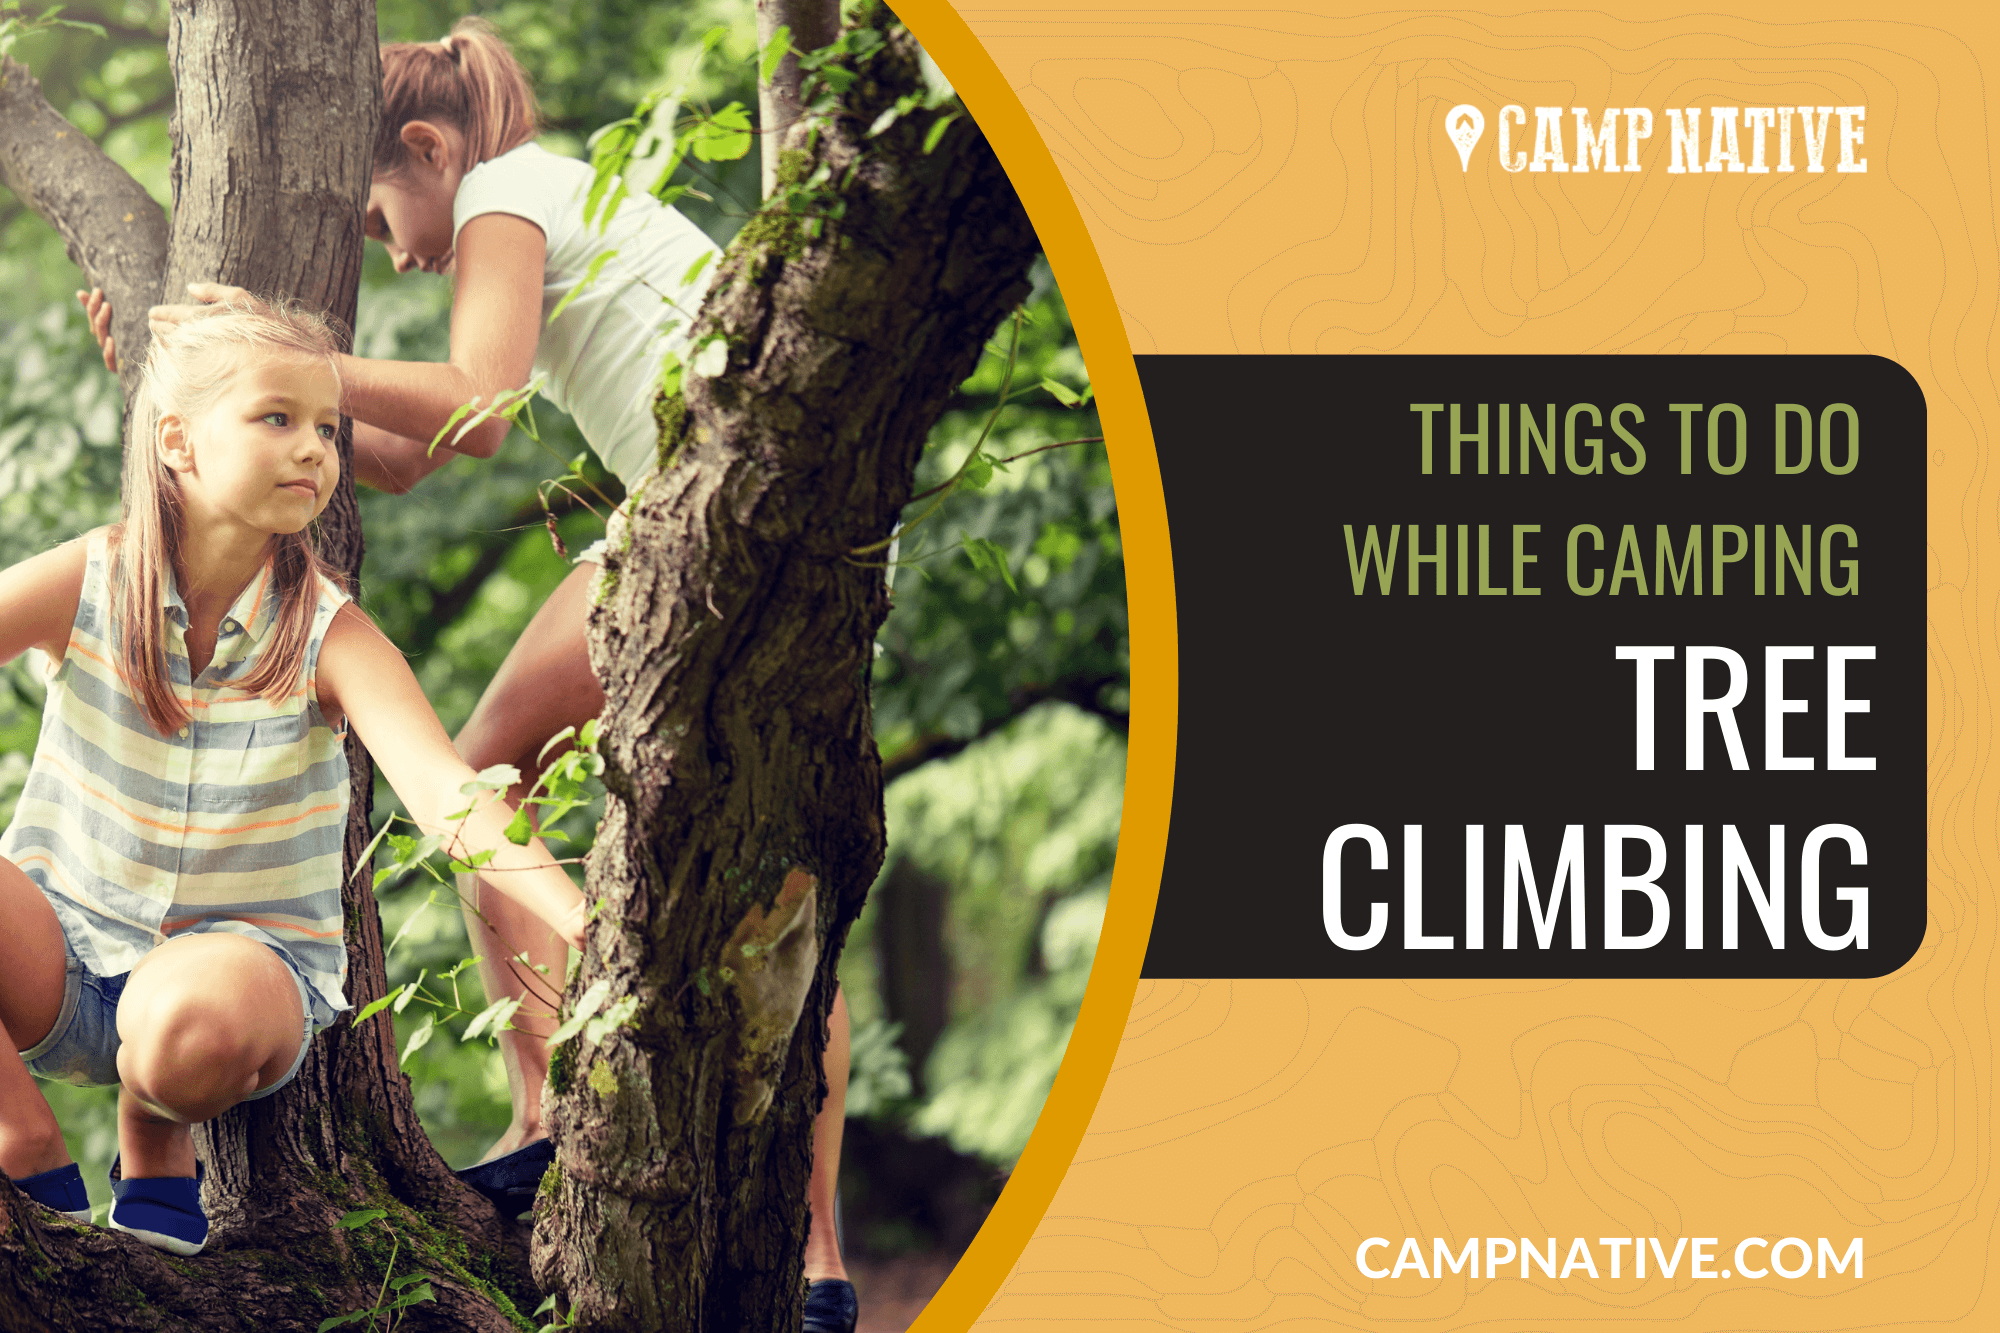 THINGS TO DO WHILE CAMPING TREE CLIMBING